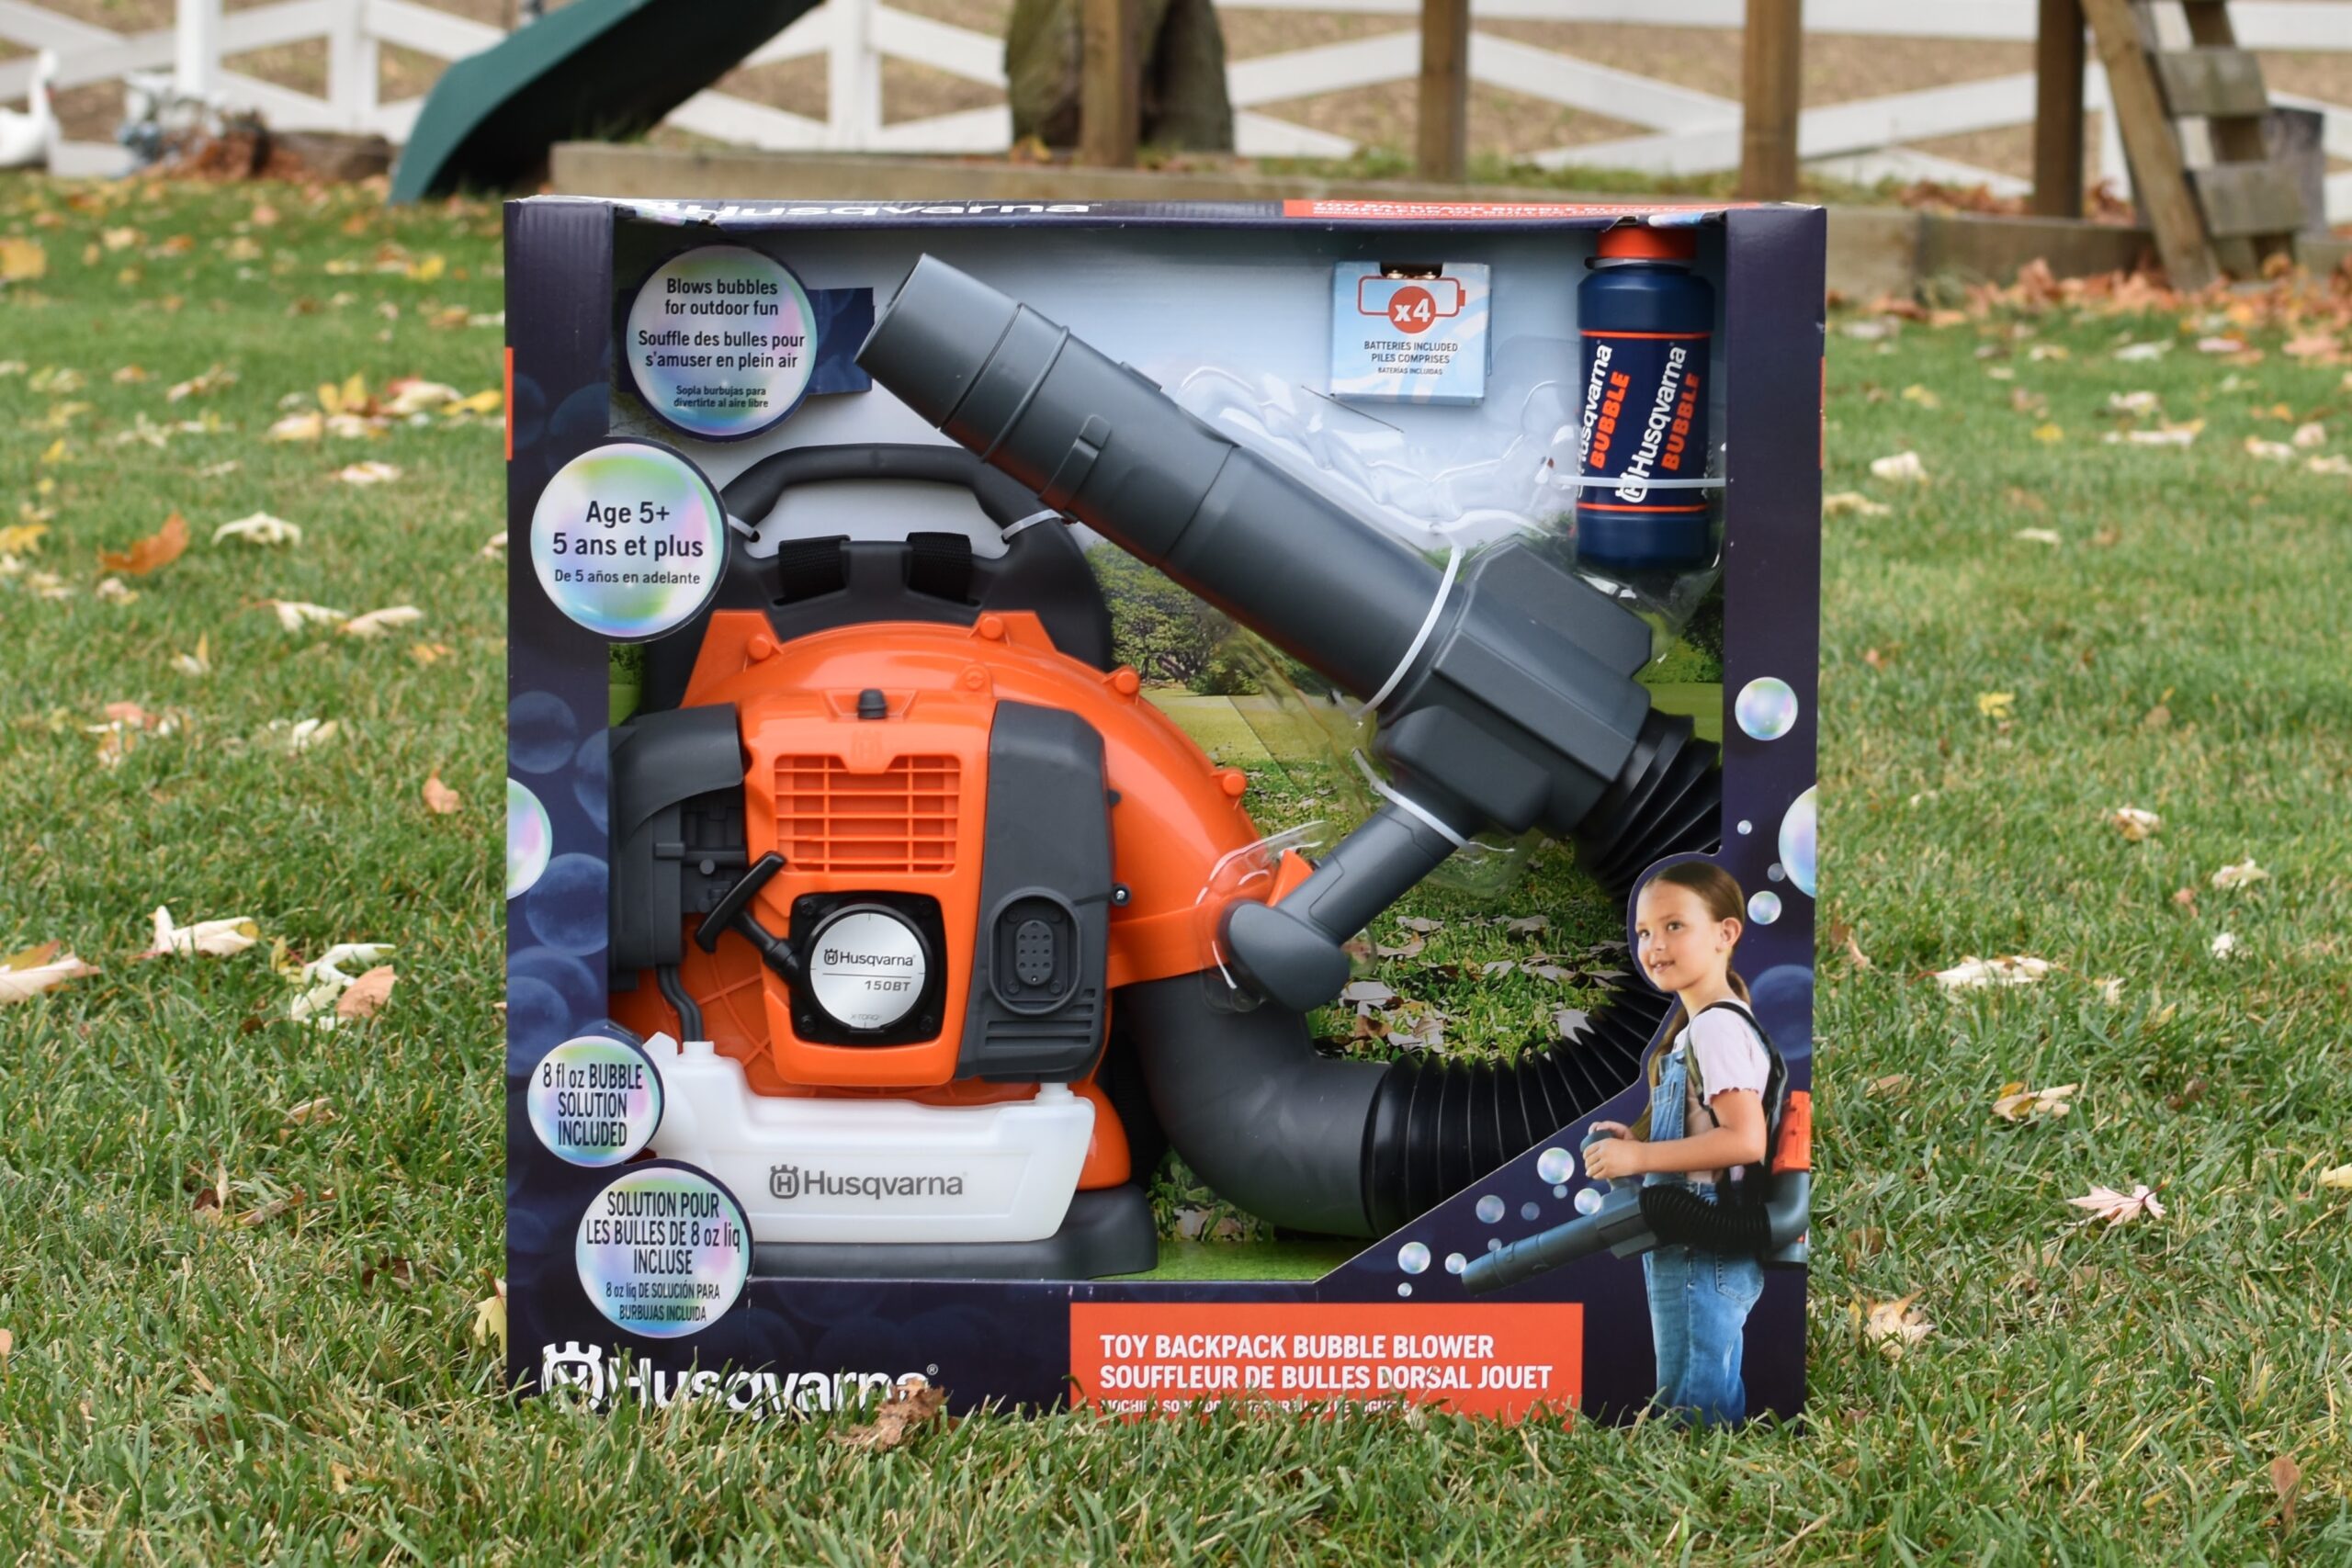 Toy Backpack Bubble Blower - HUSQVARNA